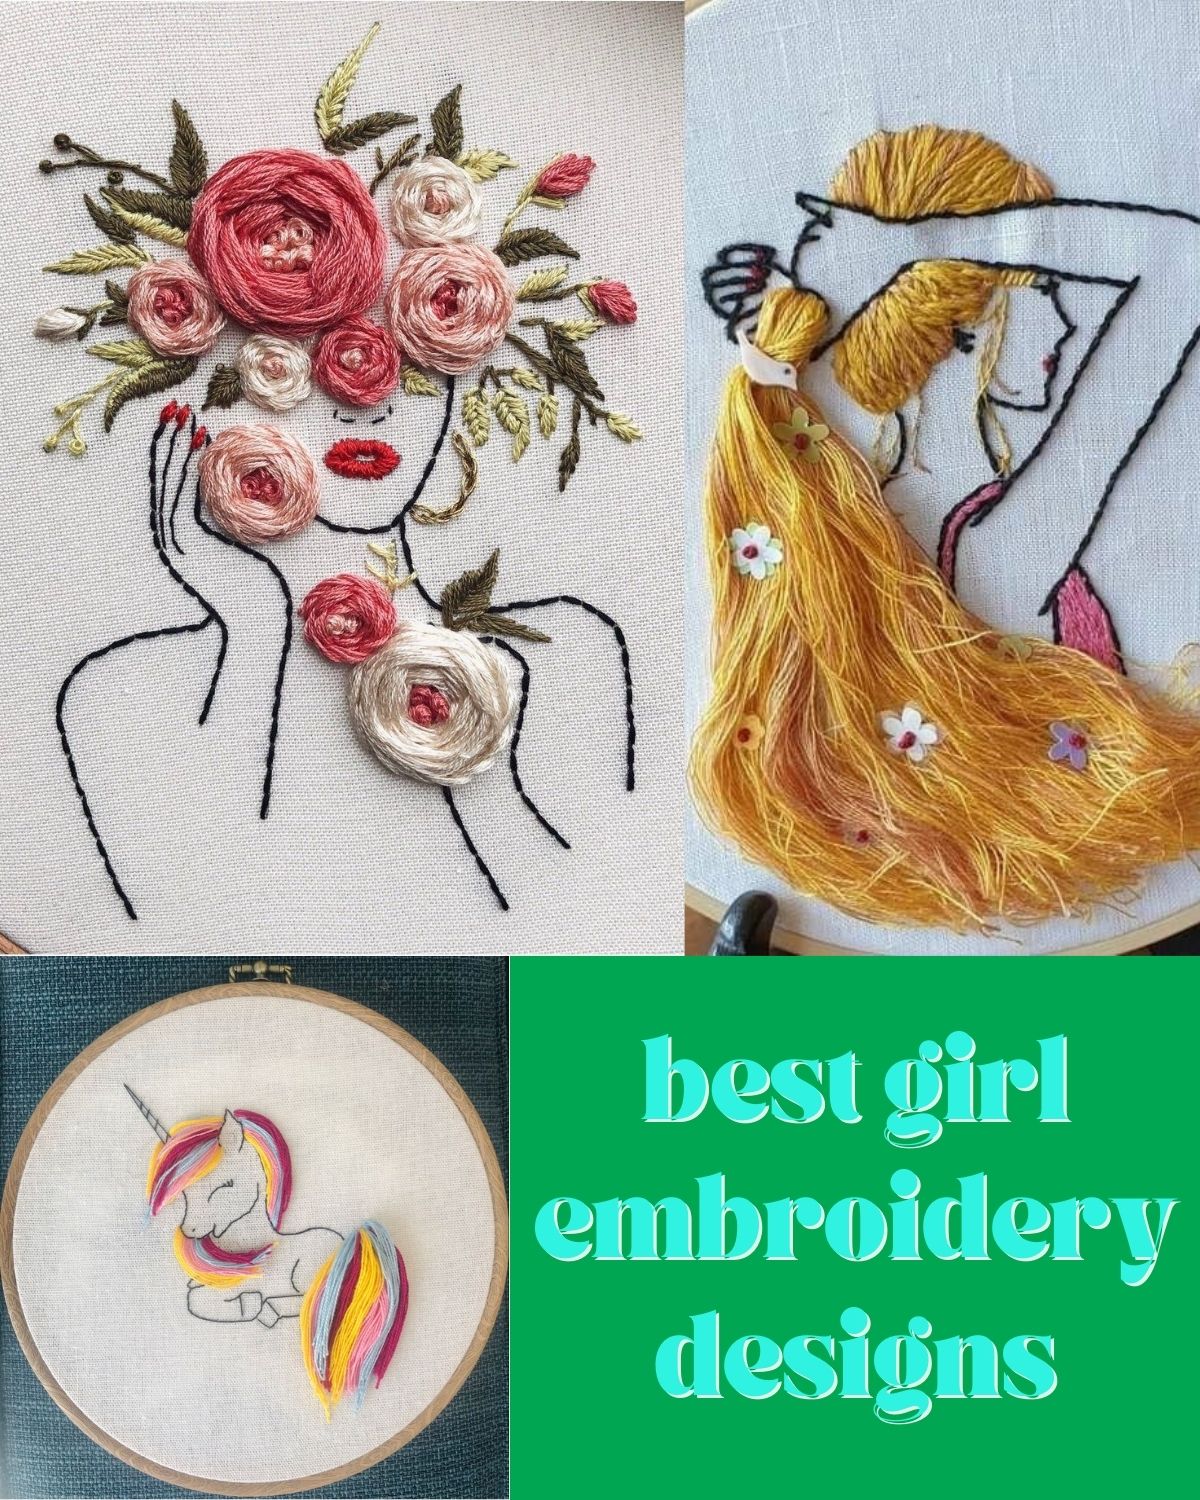 Three girly embroidery patterns